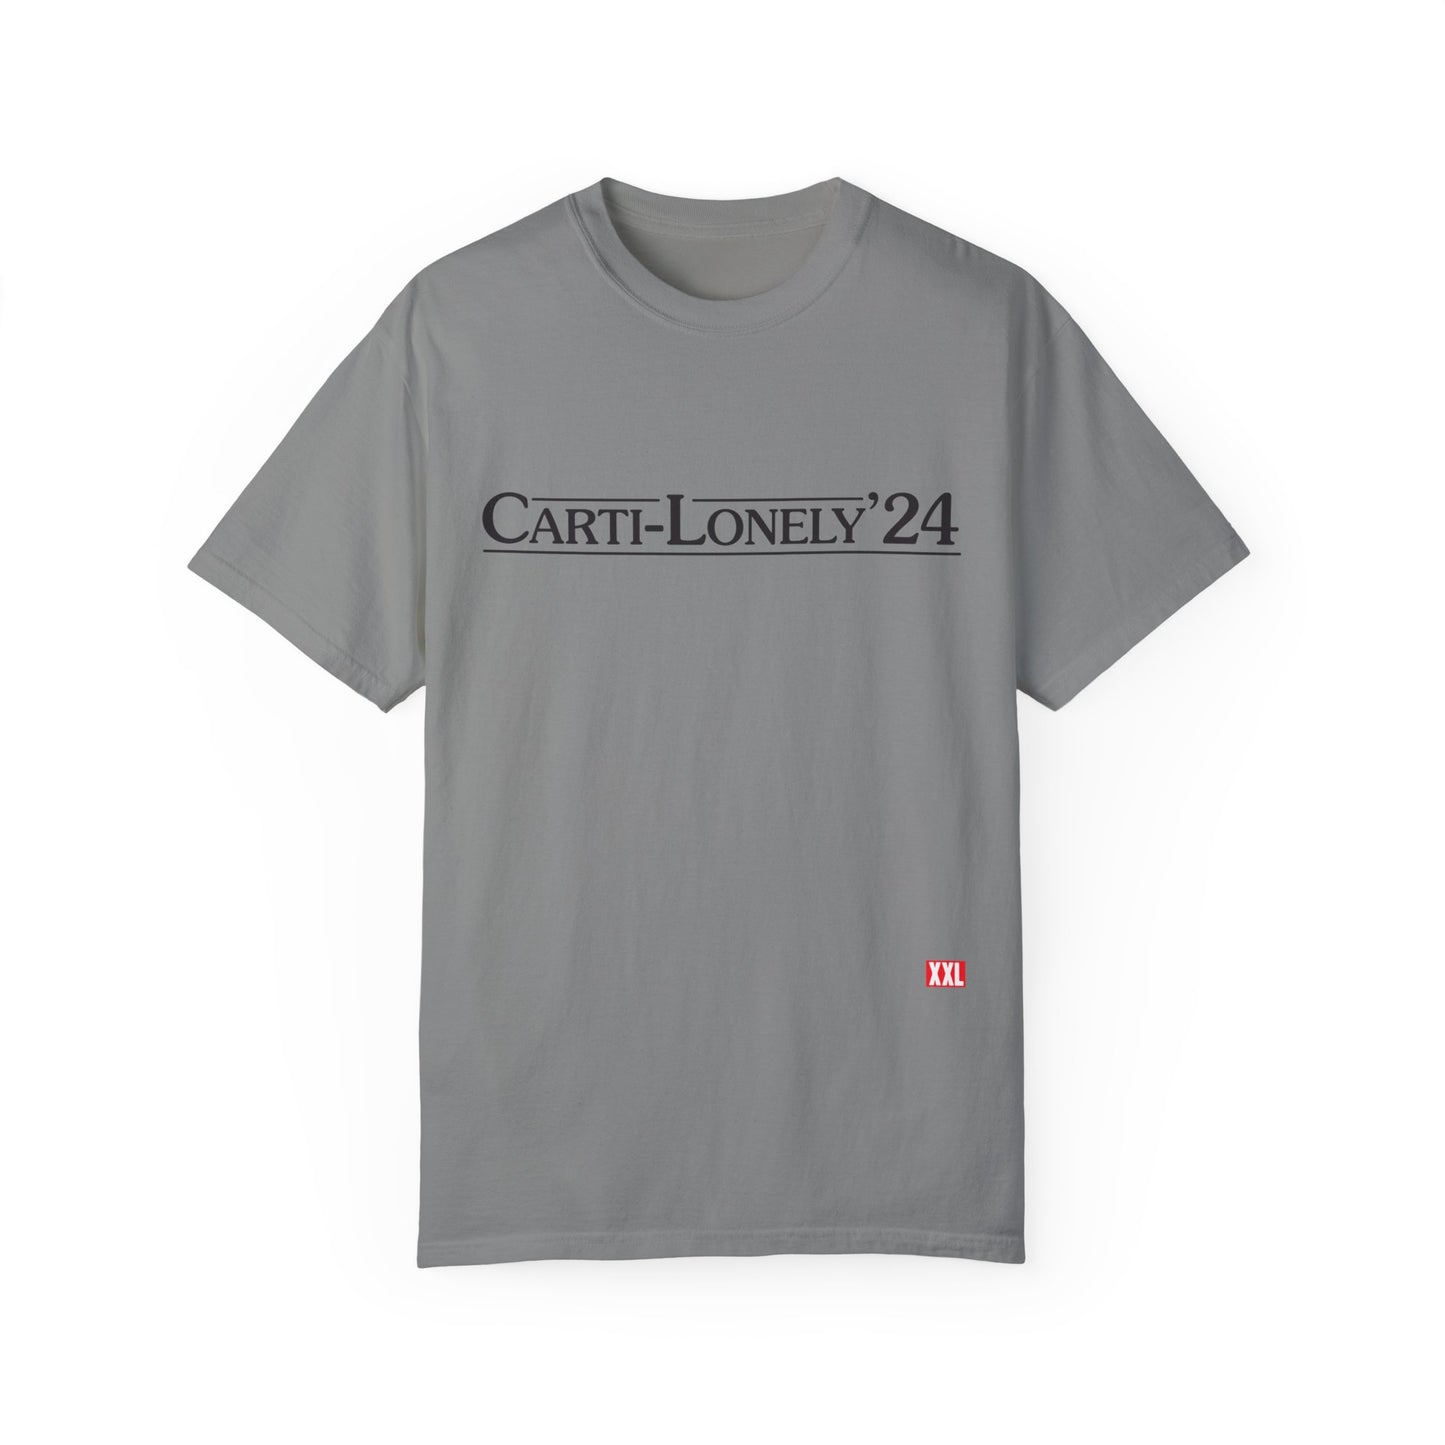 Carti-Lonely '24 T-Shirt